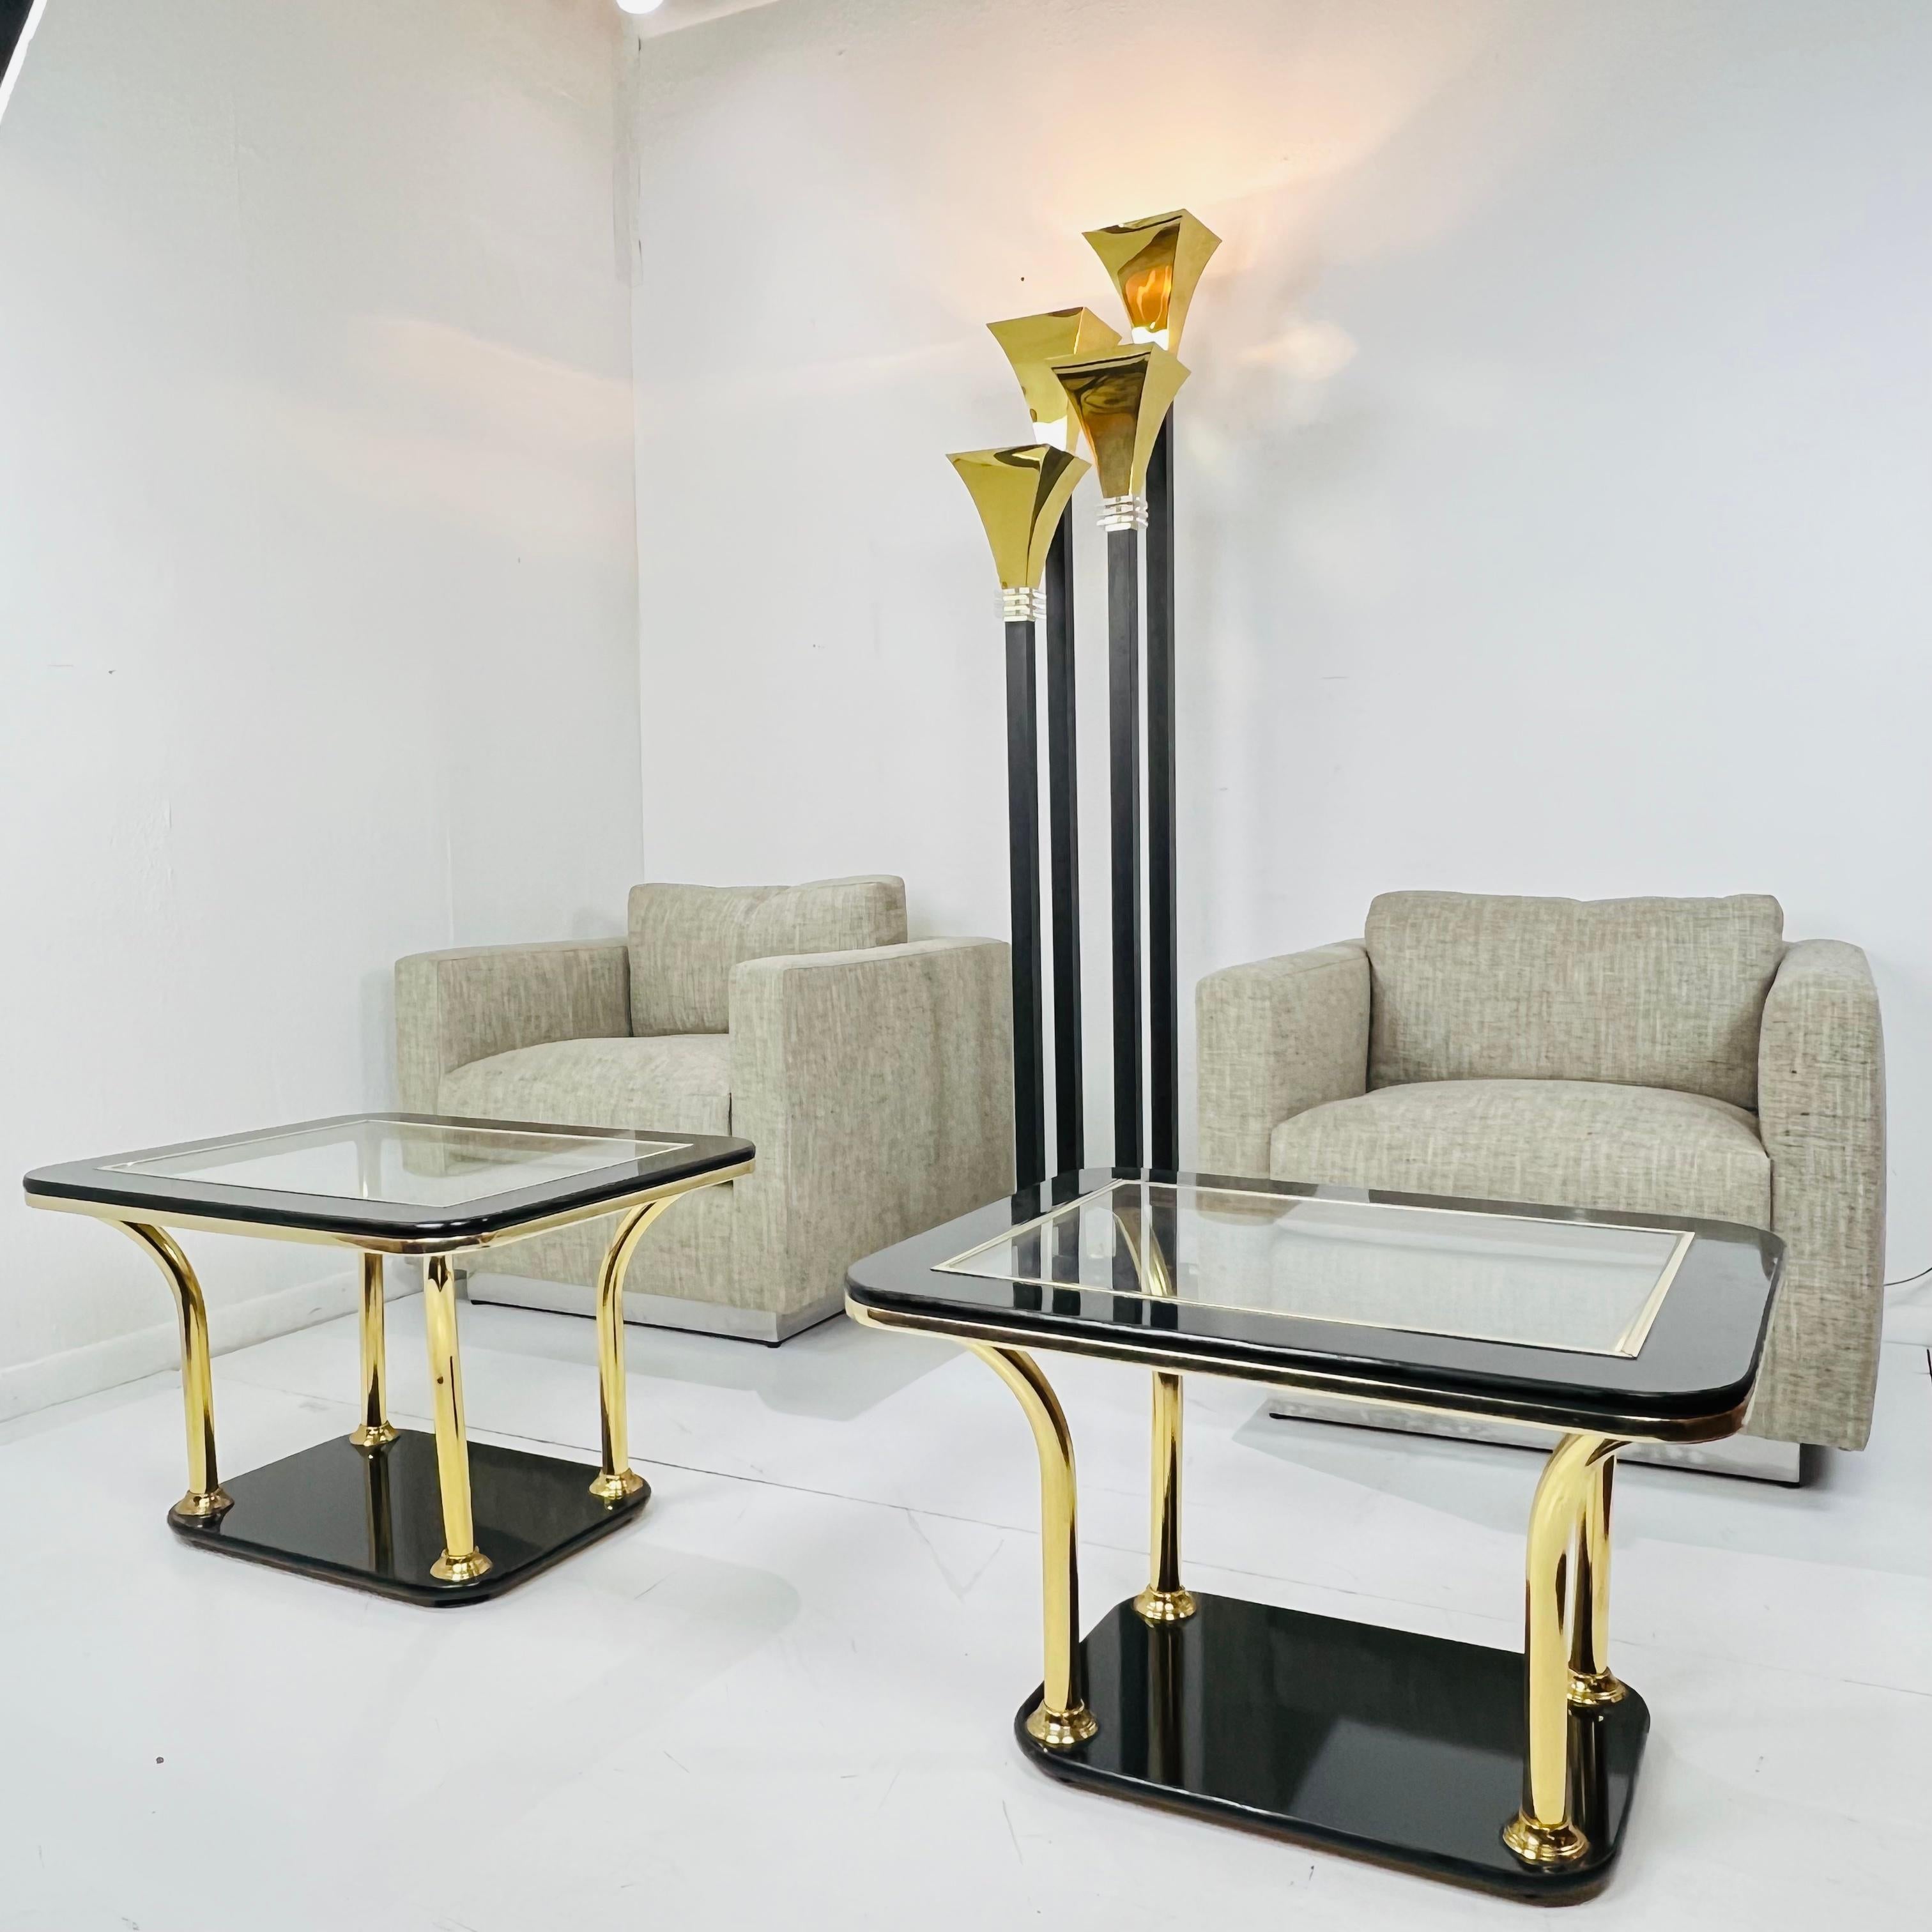 Large art deco torchiere floor lamp featuring 4 ebonized metal pedestals with brass flared up-shades and lucite accents. Mounted on stepped base with footswitch. Good vintage condition with normal wear from age and use, plus some